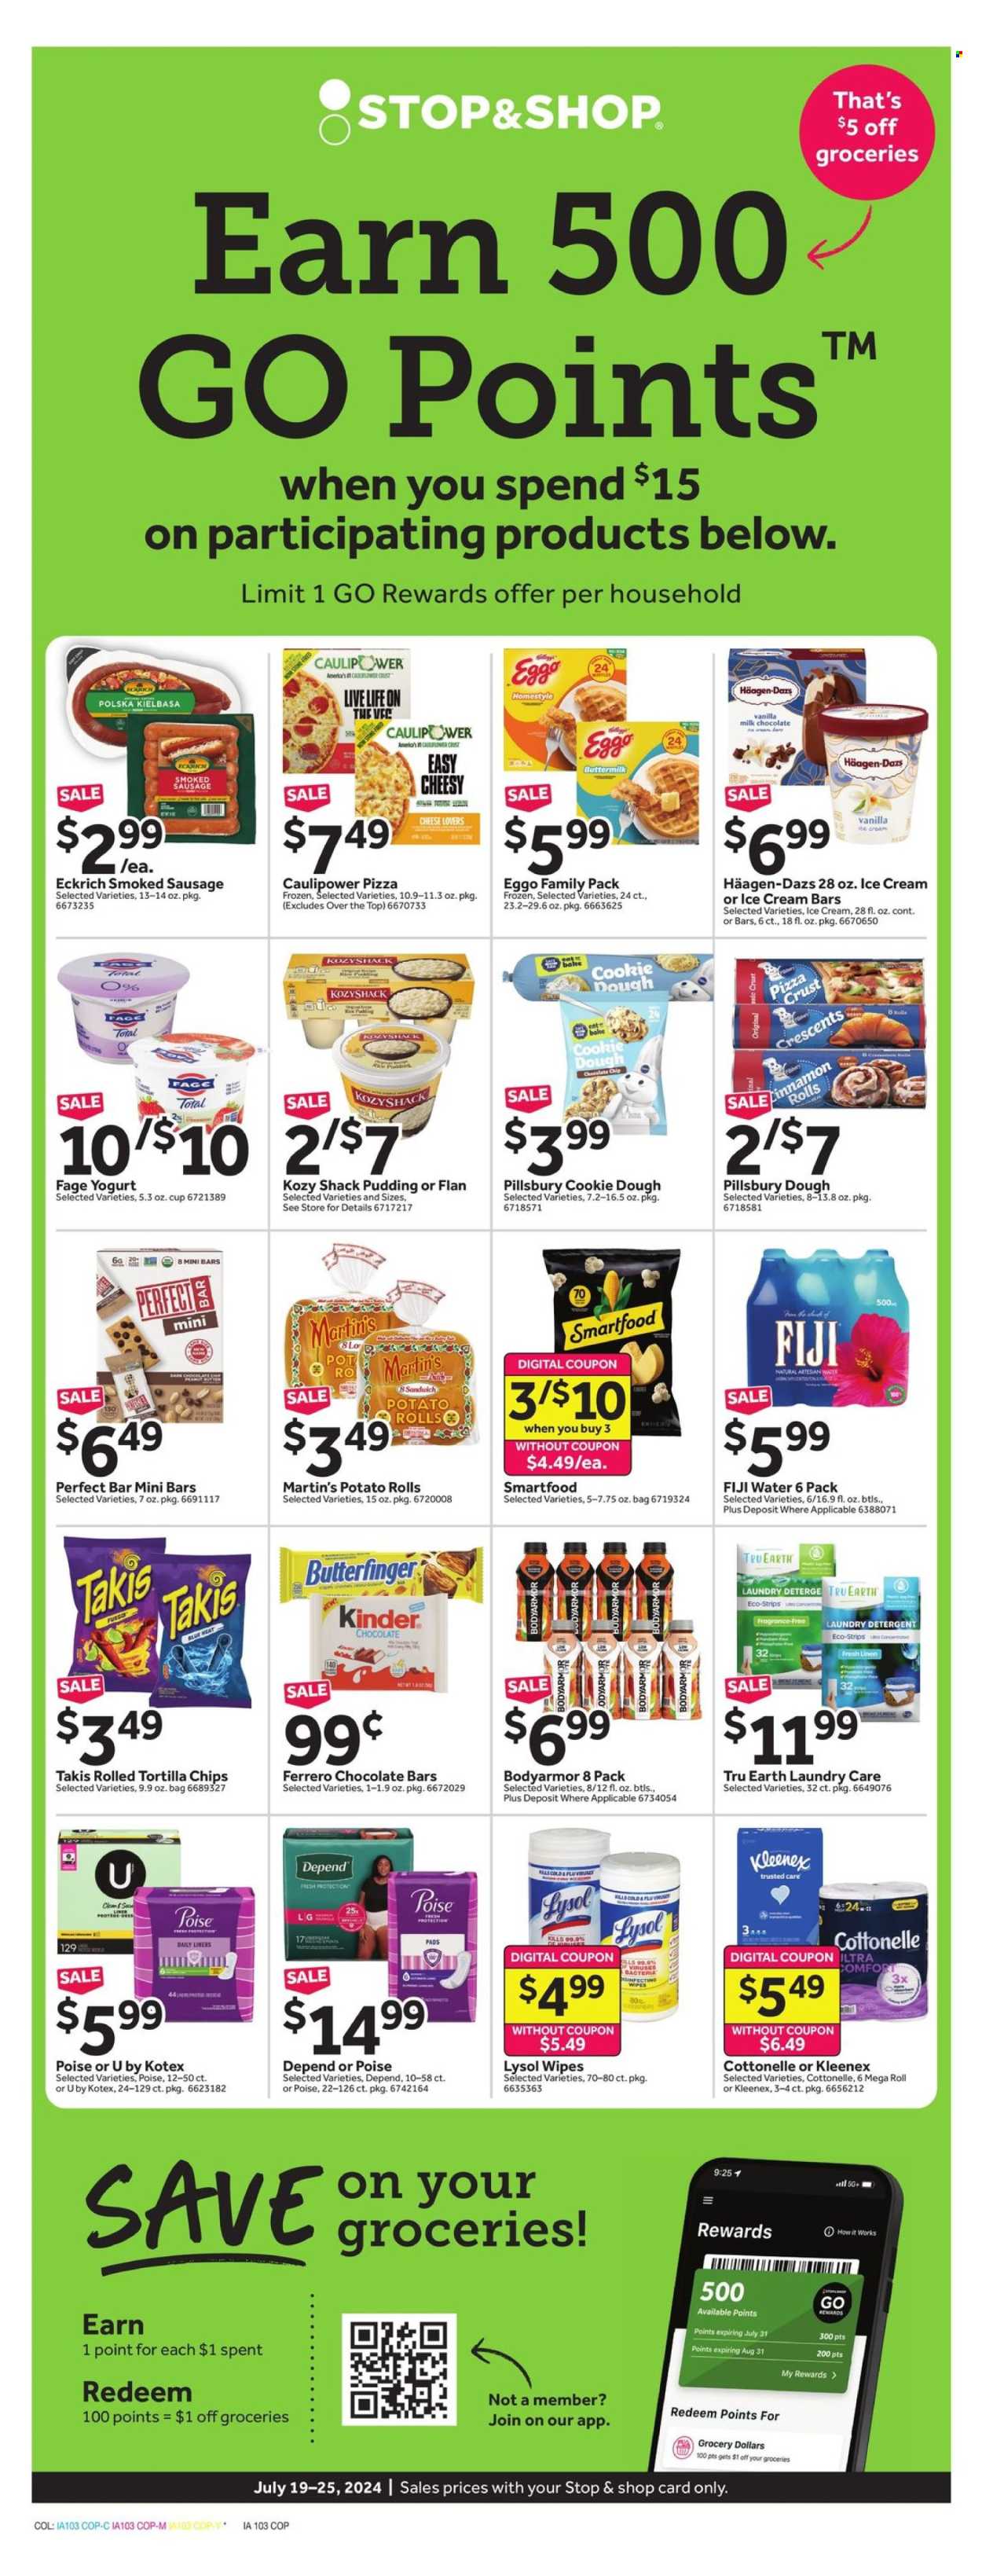 thumbnail - Stop & Shop Flyer - 07/19/2024 - 07/25/2024 - Sales products - pretzels, Old El Paso, onion, mandarines, fruit cup, steak, Campbell's, meatballs, pasta, dinner kit, ready meal, Silk, snack bar, almond milk, plant-based milk, butter, Dove, cookies, Bounty, crackers, Kellogg's, Pop-Tarts, Keebler, Cheez-It, Chex Mix, salty snack, ARM & HAMMER, Del Monte, cereals, Frosted Flakes, Nature Valley, Fiber One, seasoning, ketchup, marinade, Capri Sun, Pepsi, juice, Lipton, fruit drink, soft drink, electrolyte drink, seltzer water, flavored water, bottled water, Smartwater, vitamin water, water, carbonated soft drink, coffee drink, Pampers, napkins, nappies, bath tissue, kitchen towels, paper towels, Charmin, detergent, Gain, Windex, Scrubbing Bubbles, cleaner, bleach, Tide, fabric softener, Bounce, XTRA, Suavitel, body wash, Suave, soap bar, hair products, toothbrush, Oral-B, toothpaste, mouthwash, Crest, deodorant, bowl, paper plate, paper bowl, Dixie, cat litter, allergy control. Page 5.